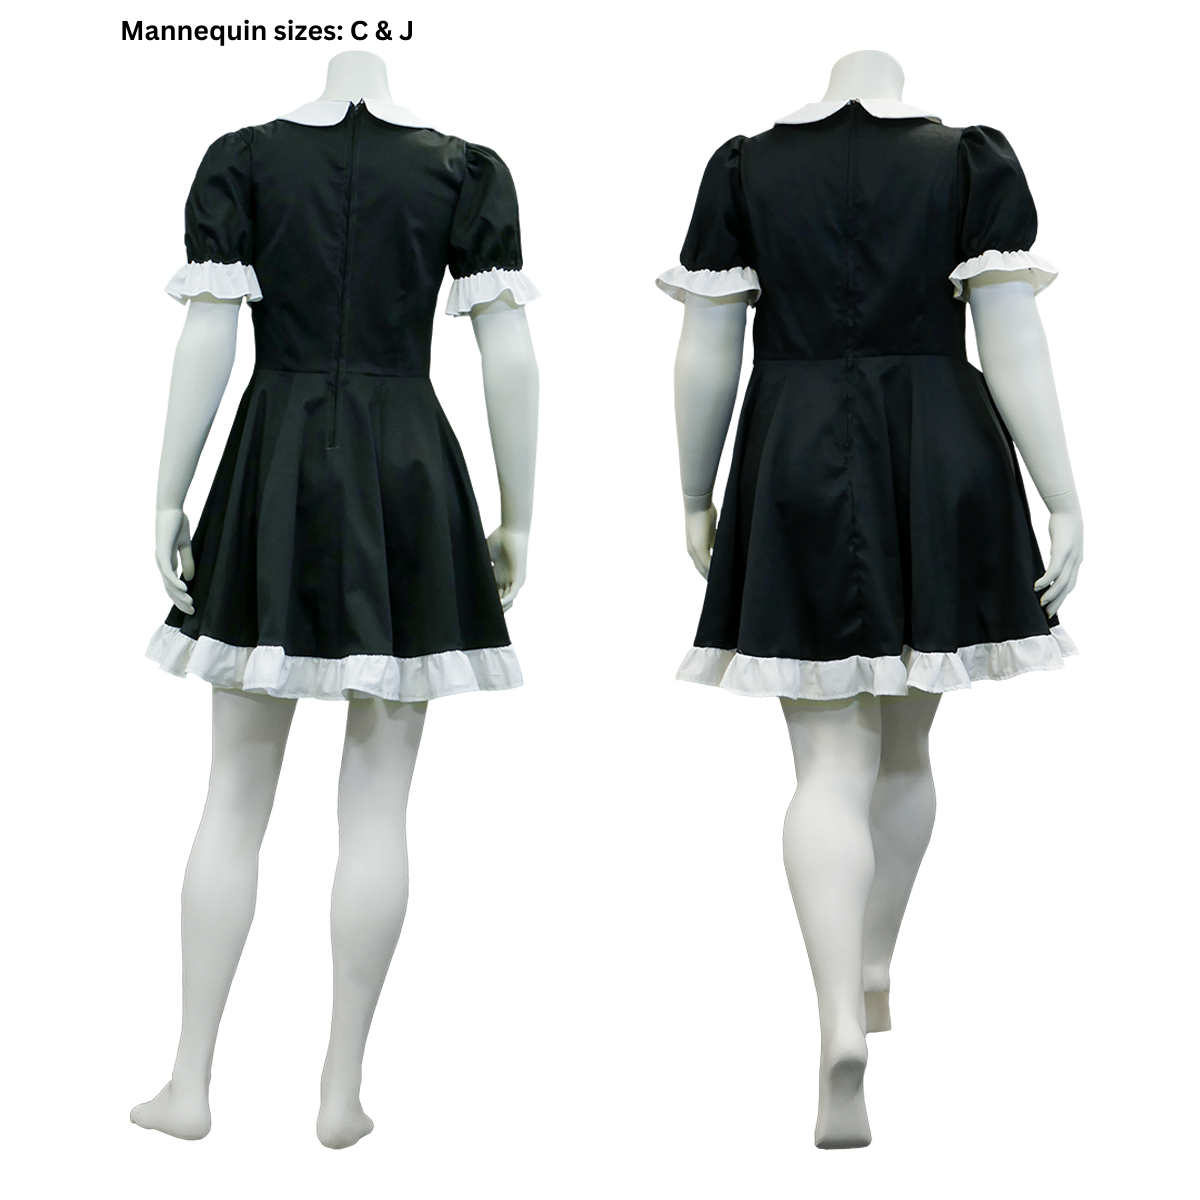 A photo of the back view of our female and plus size female mannequins in the completed Maid Outfit (sizes C and J) without the apron.